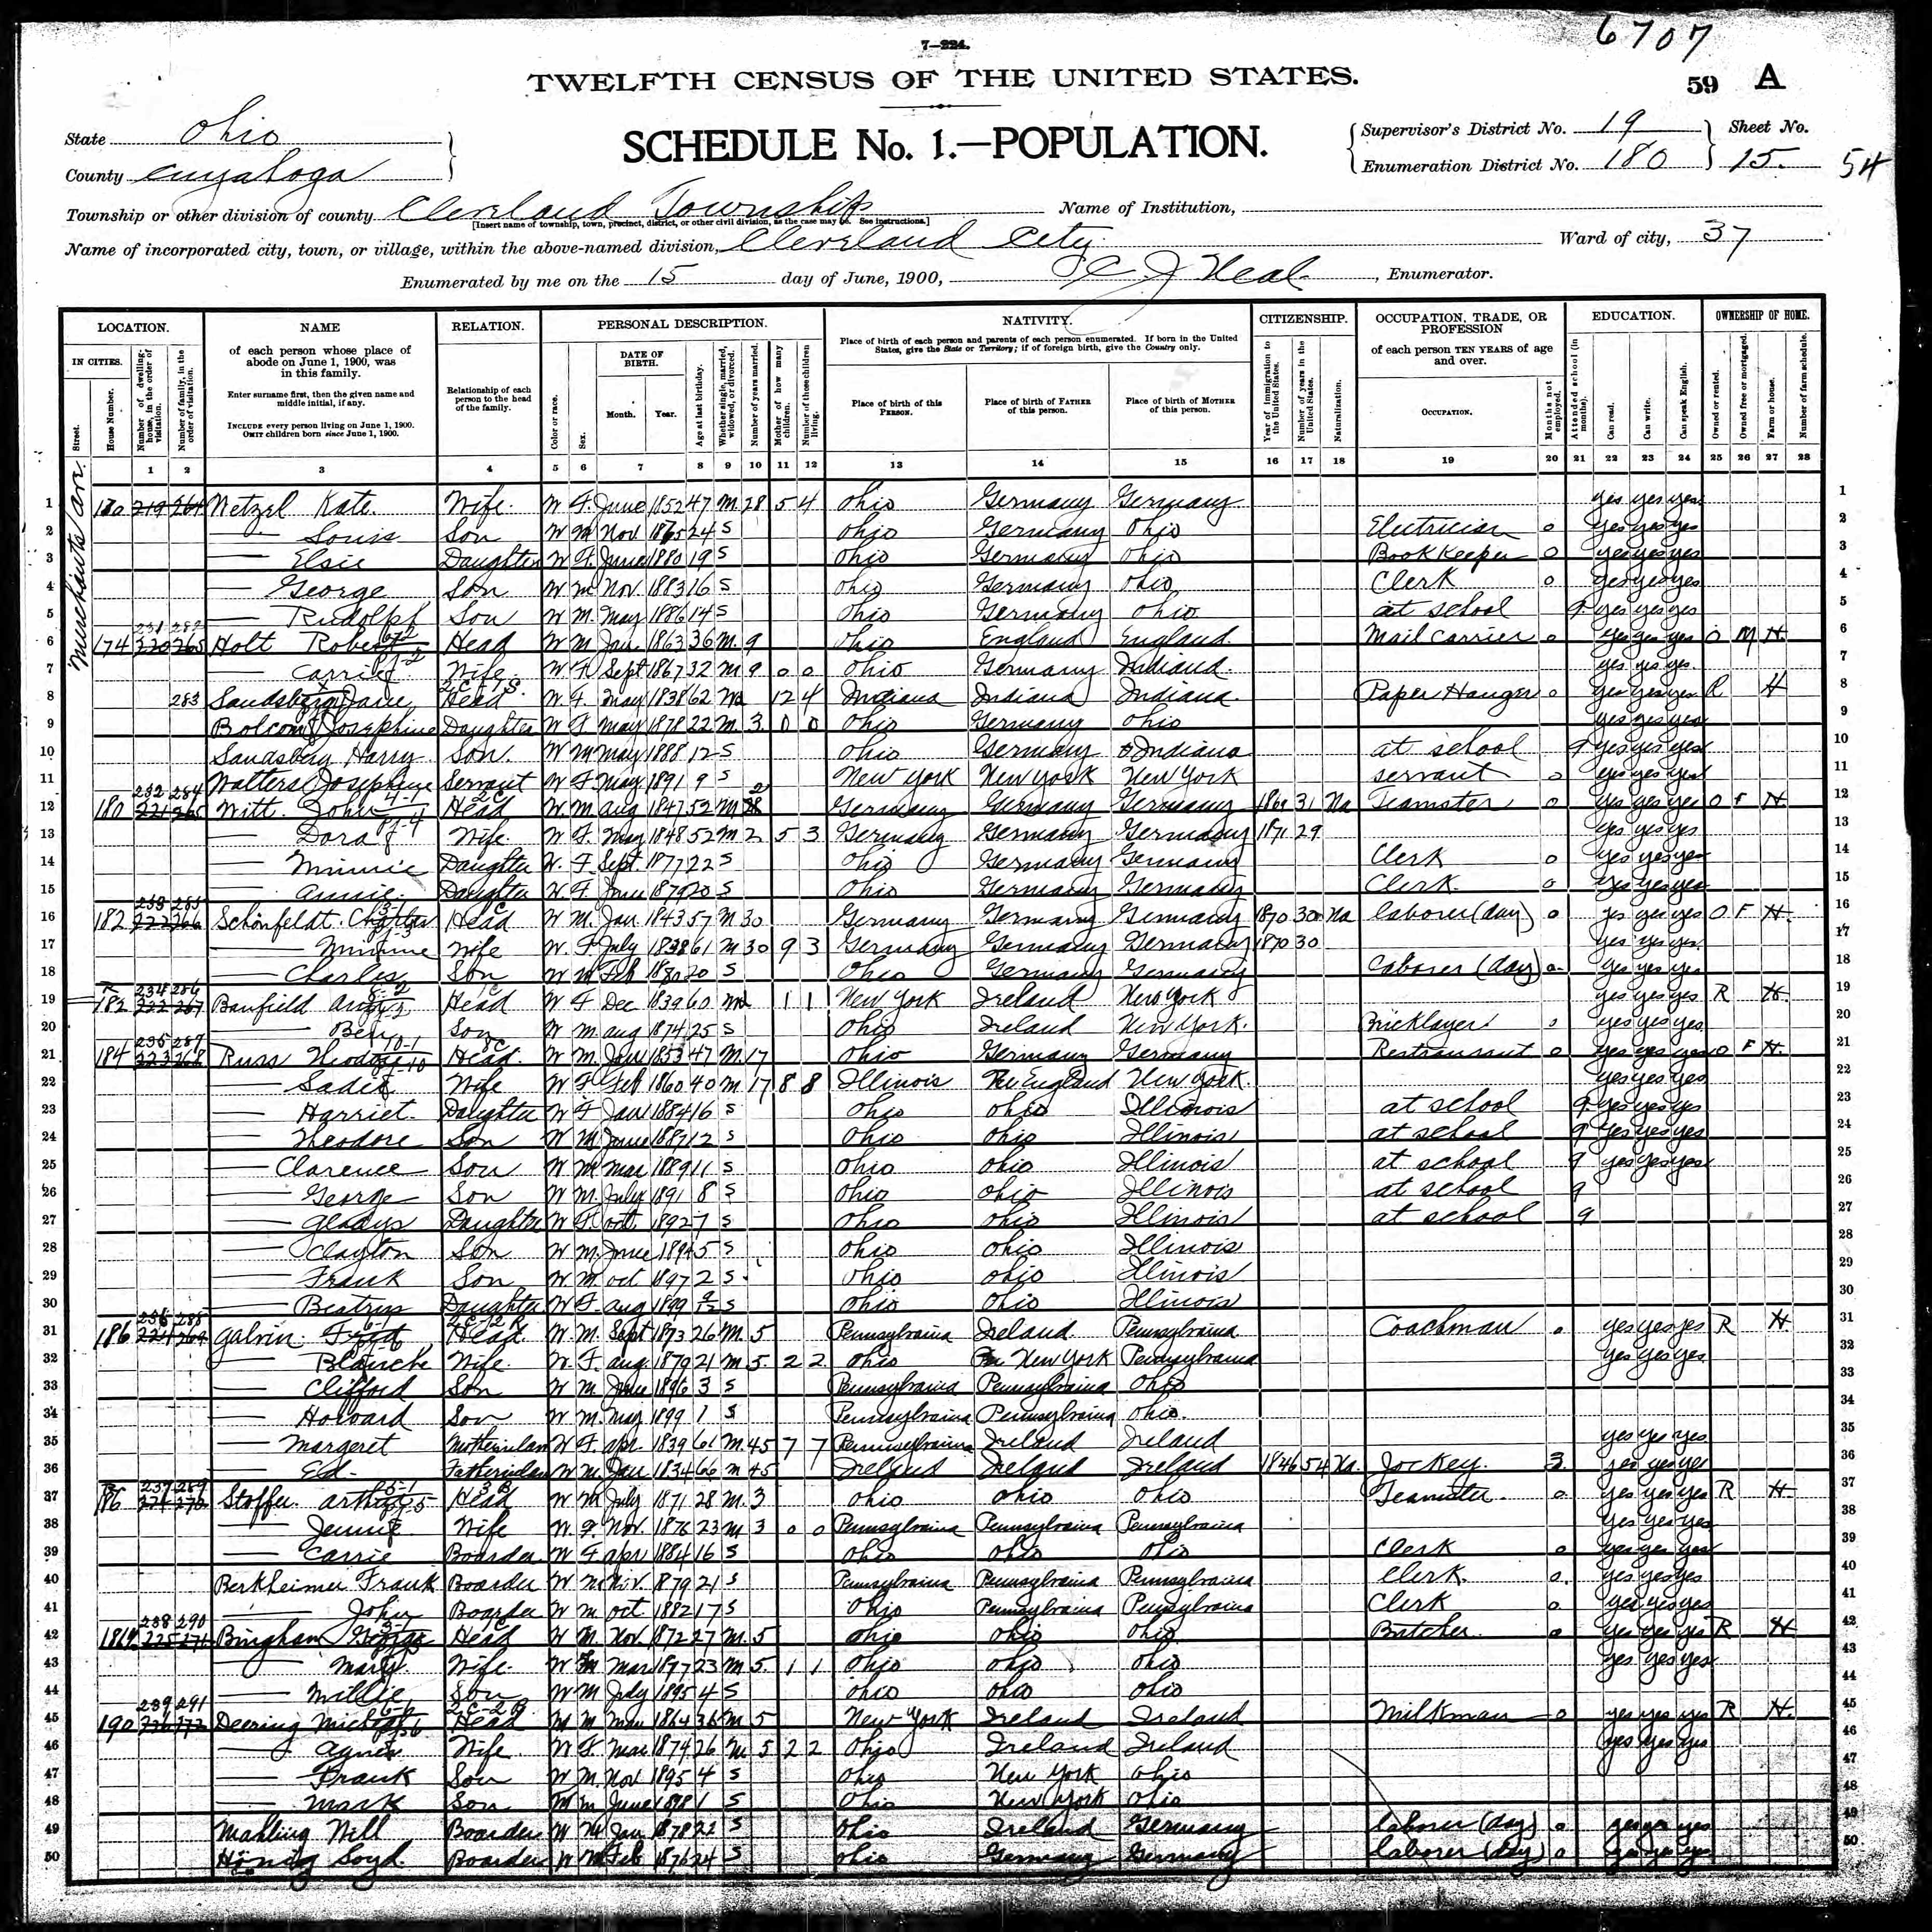 1900 United States Federal Census - Agnes Fay